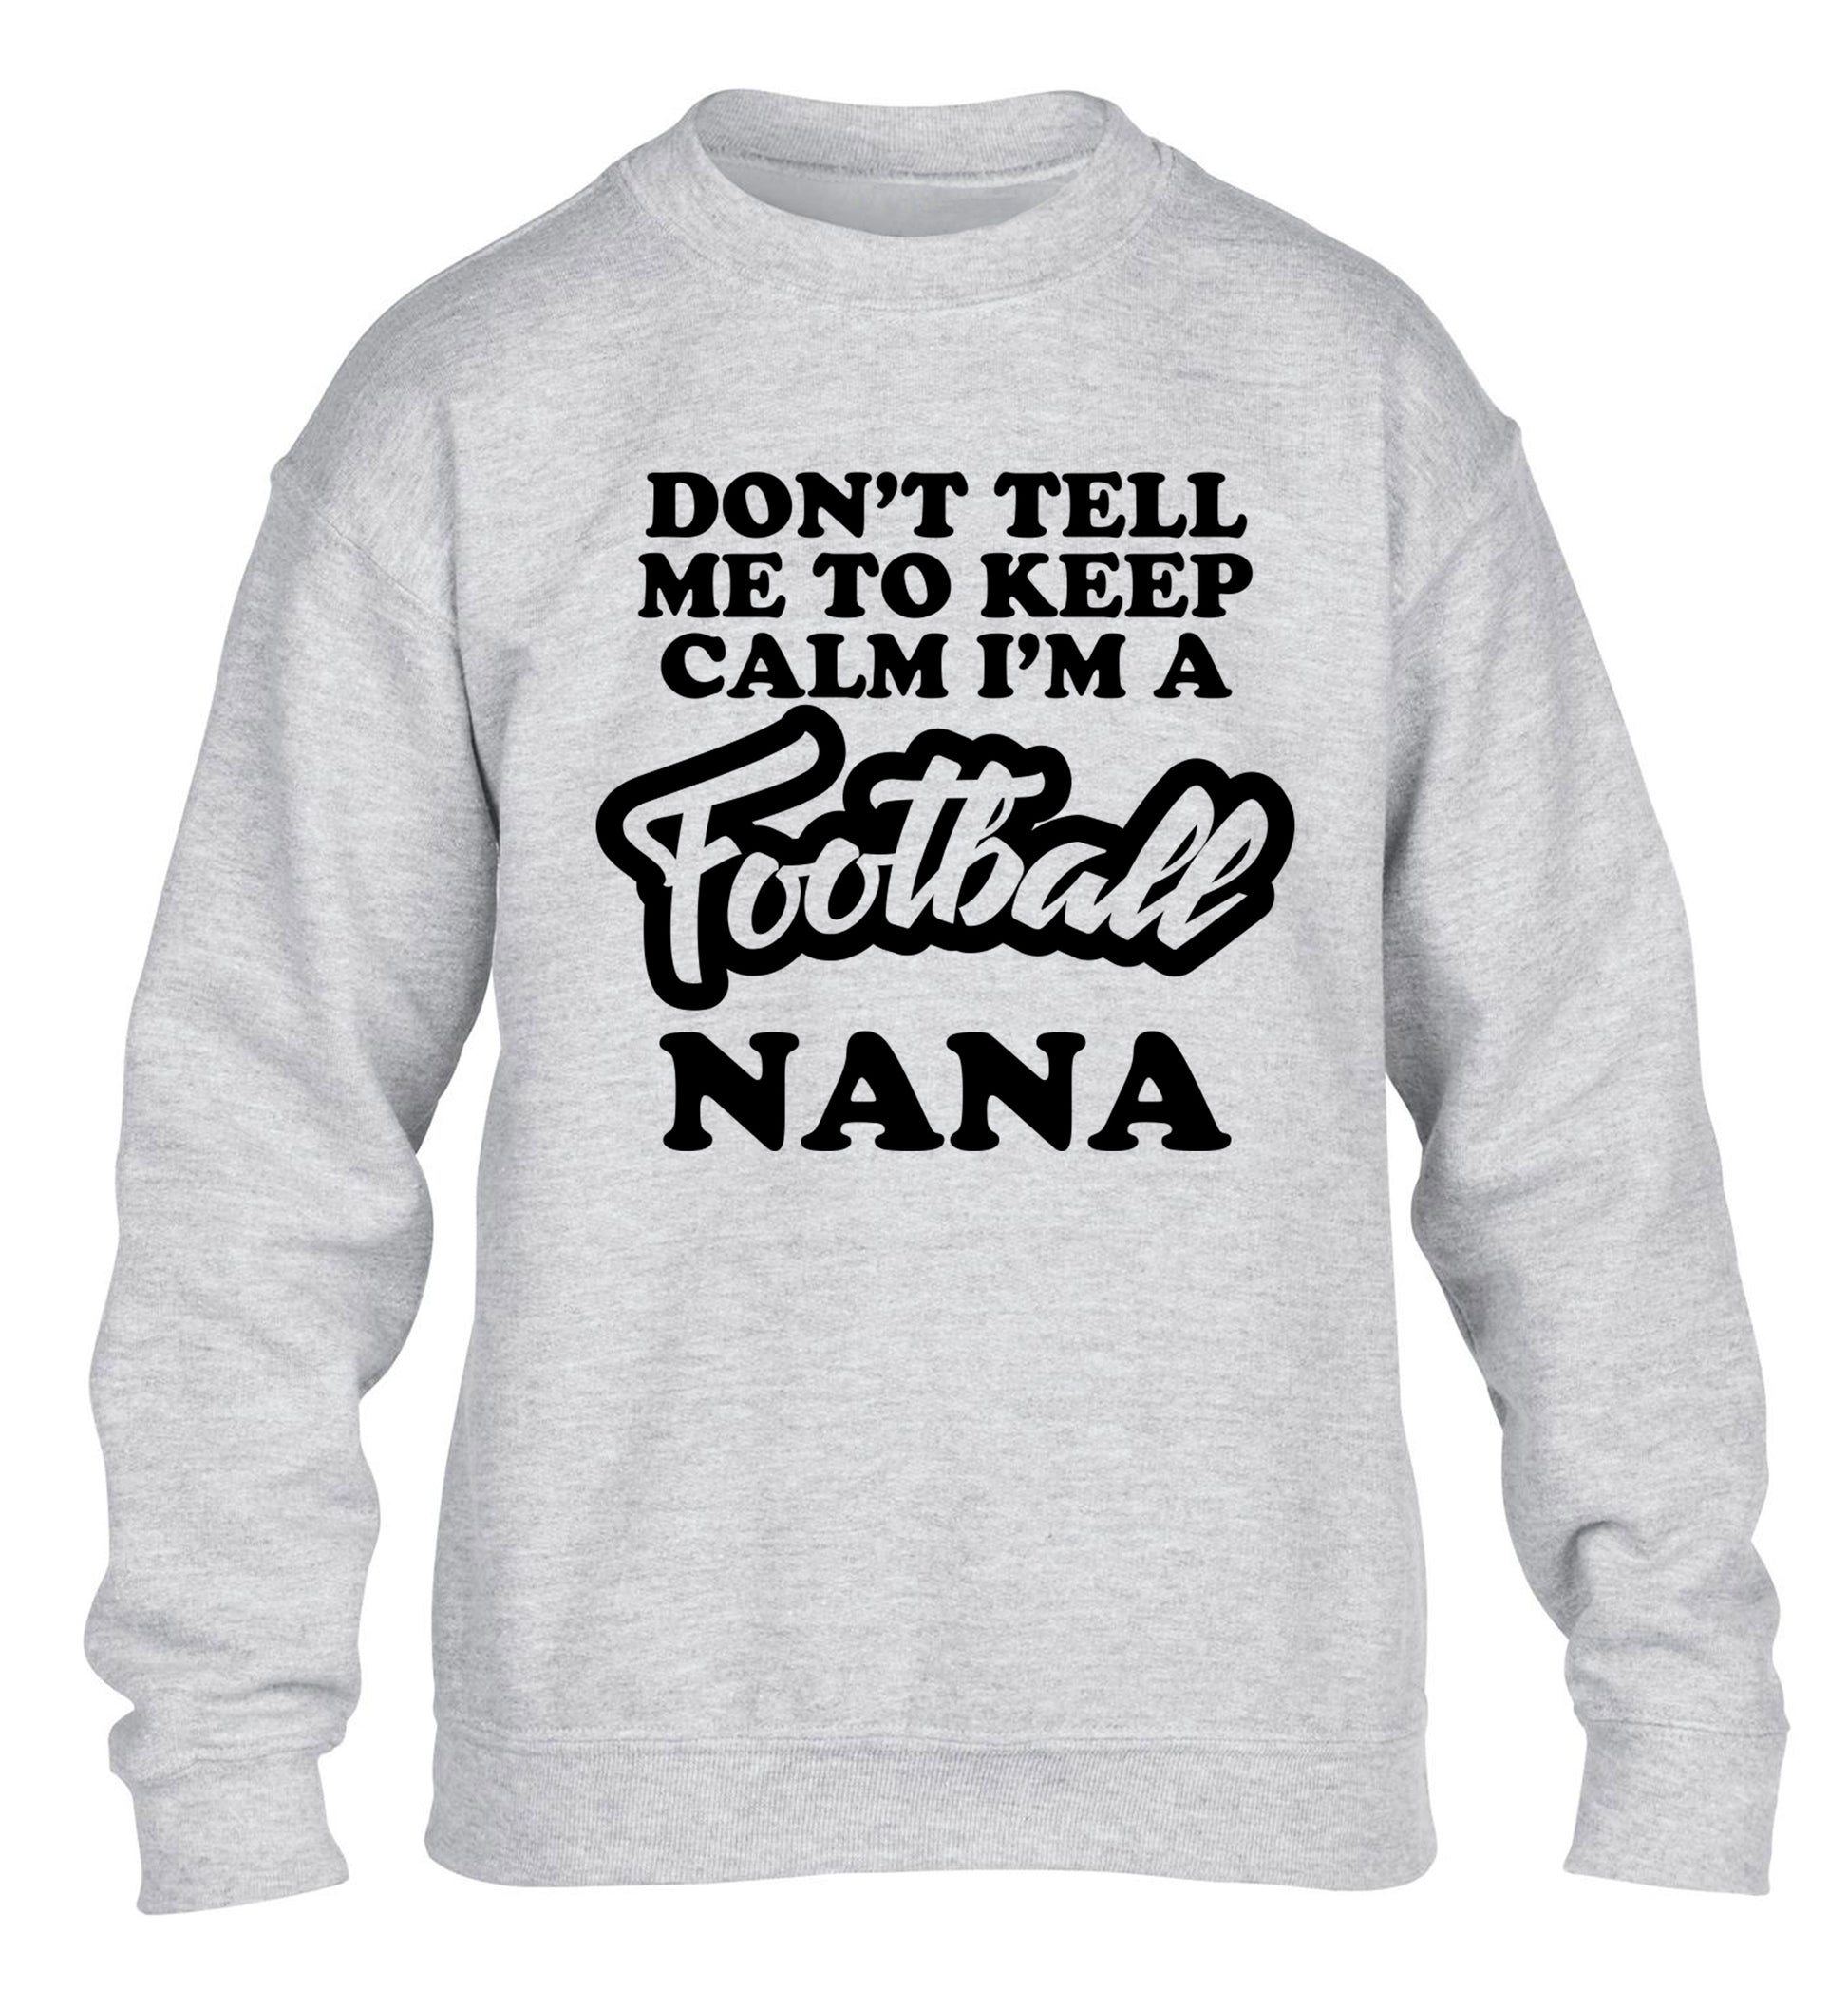 Don't tell me to keep calm I'm a football nana children's grey sweater 12-14 Years